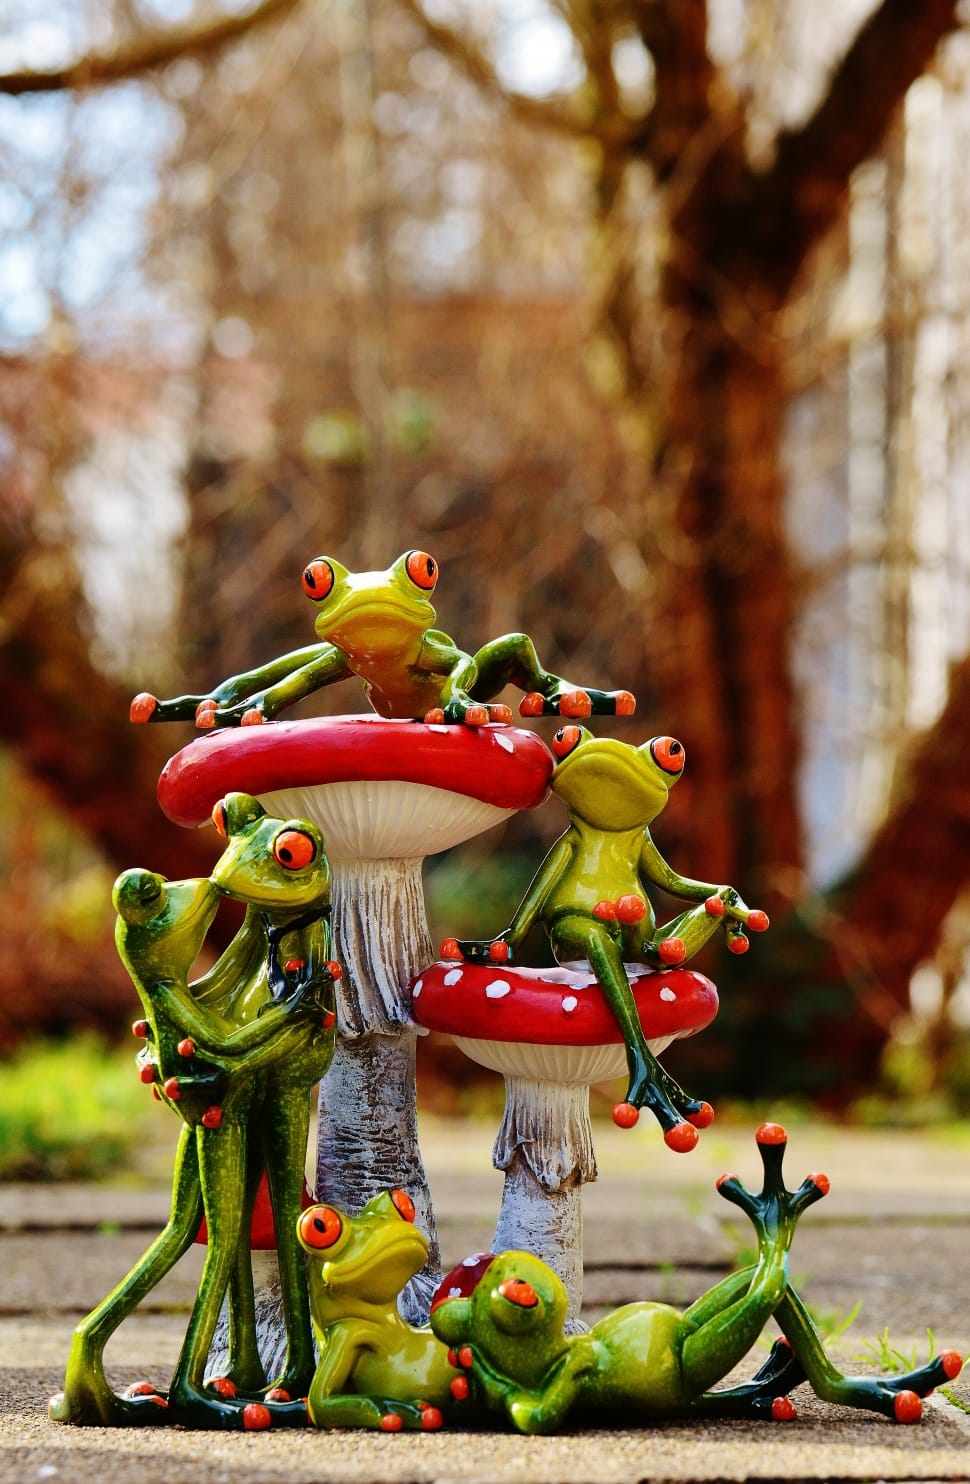 green frogs on red and white mushroom ceramic figurine preview